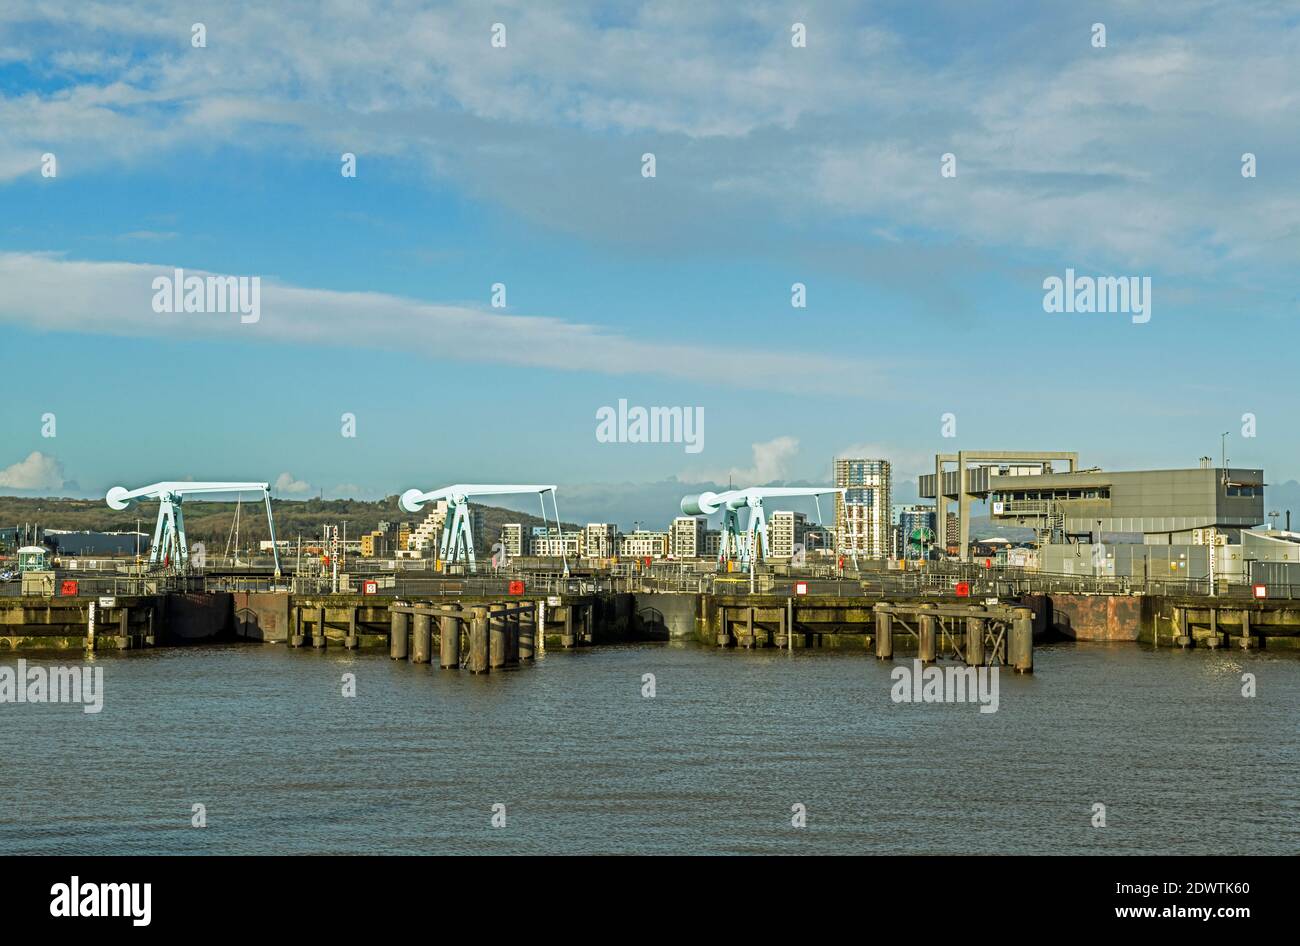 The three bascule bridges allowing access to and from the Cardiff Bay freshwater lake in Cardiff, south Wales. Stock Photo